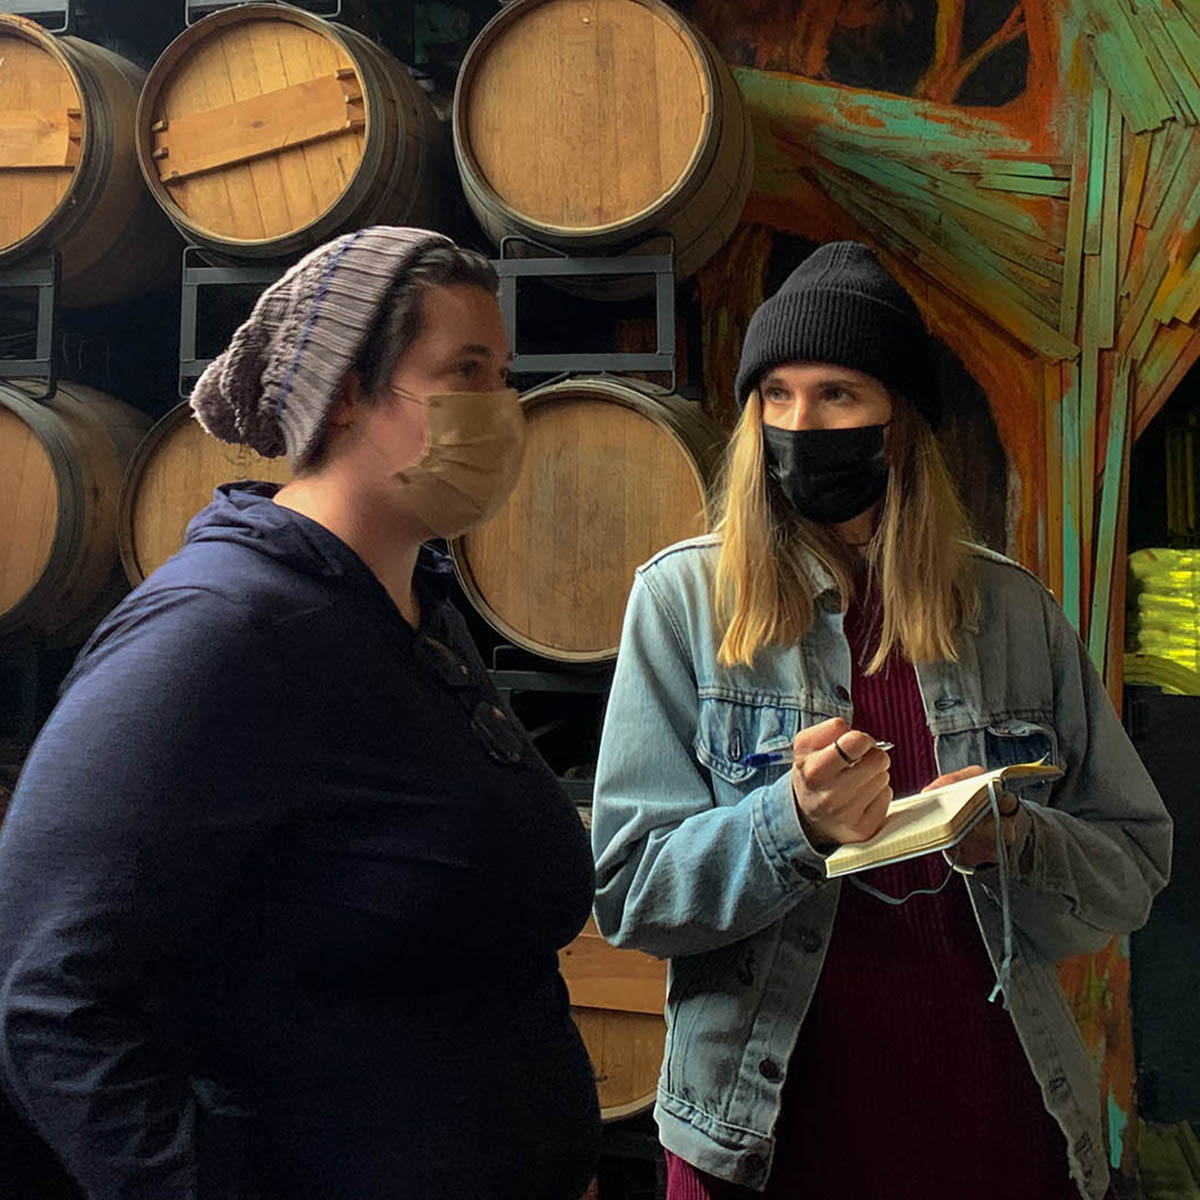 Photo of two people wearing masks, one with a notebook and pen in hand. Behind them there are barrels.